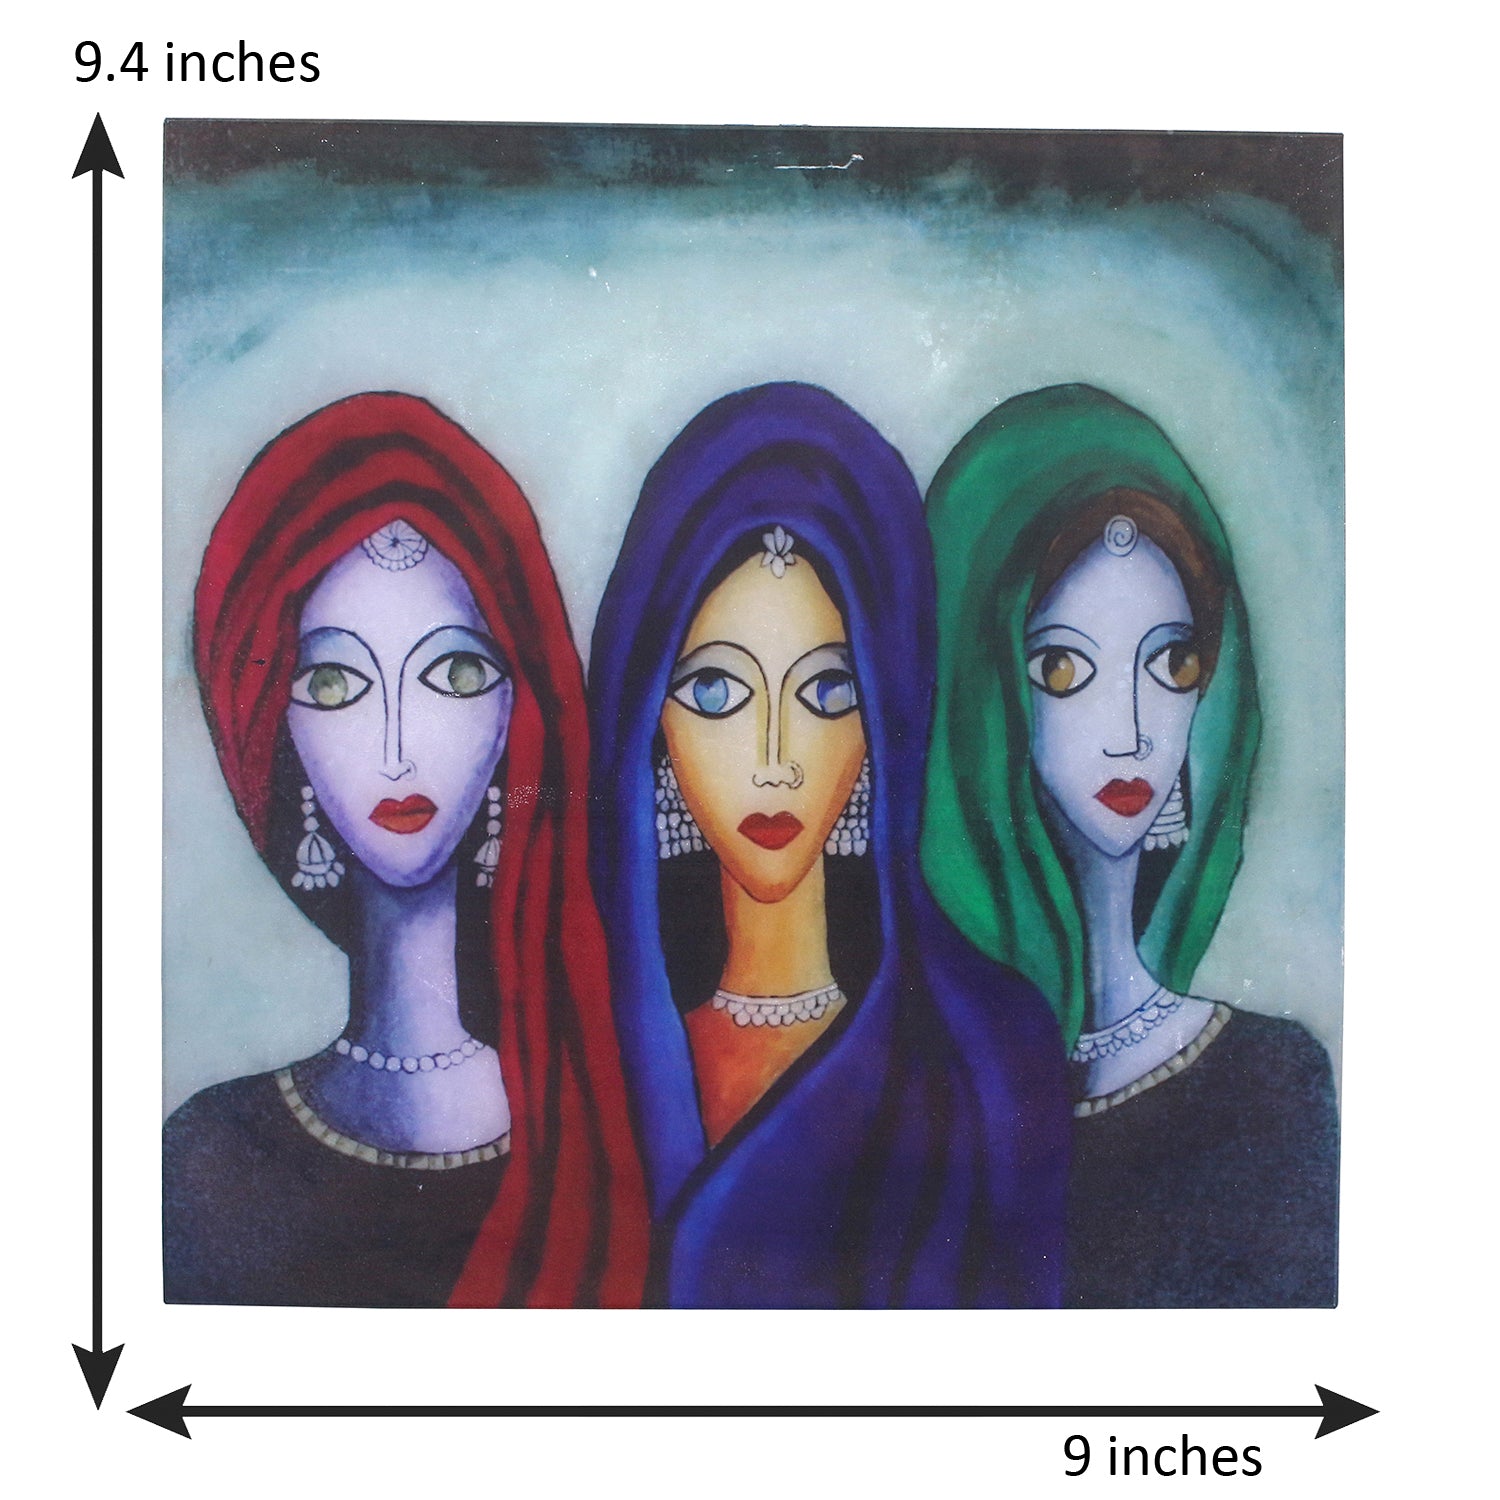 Abstract 3 Women Art Painting On Marble Square Tile 2